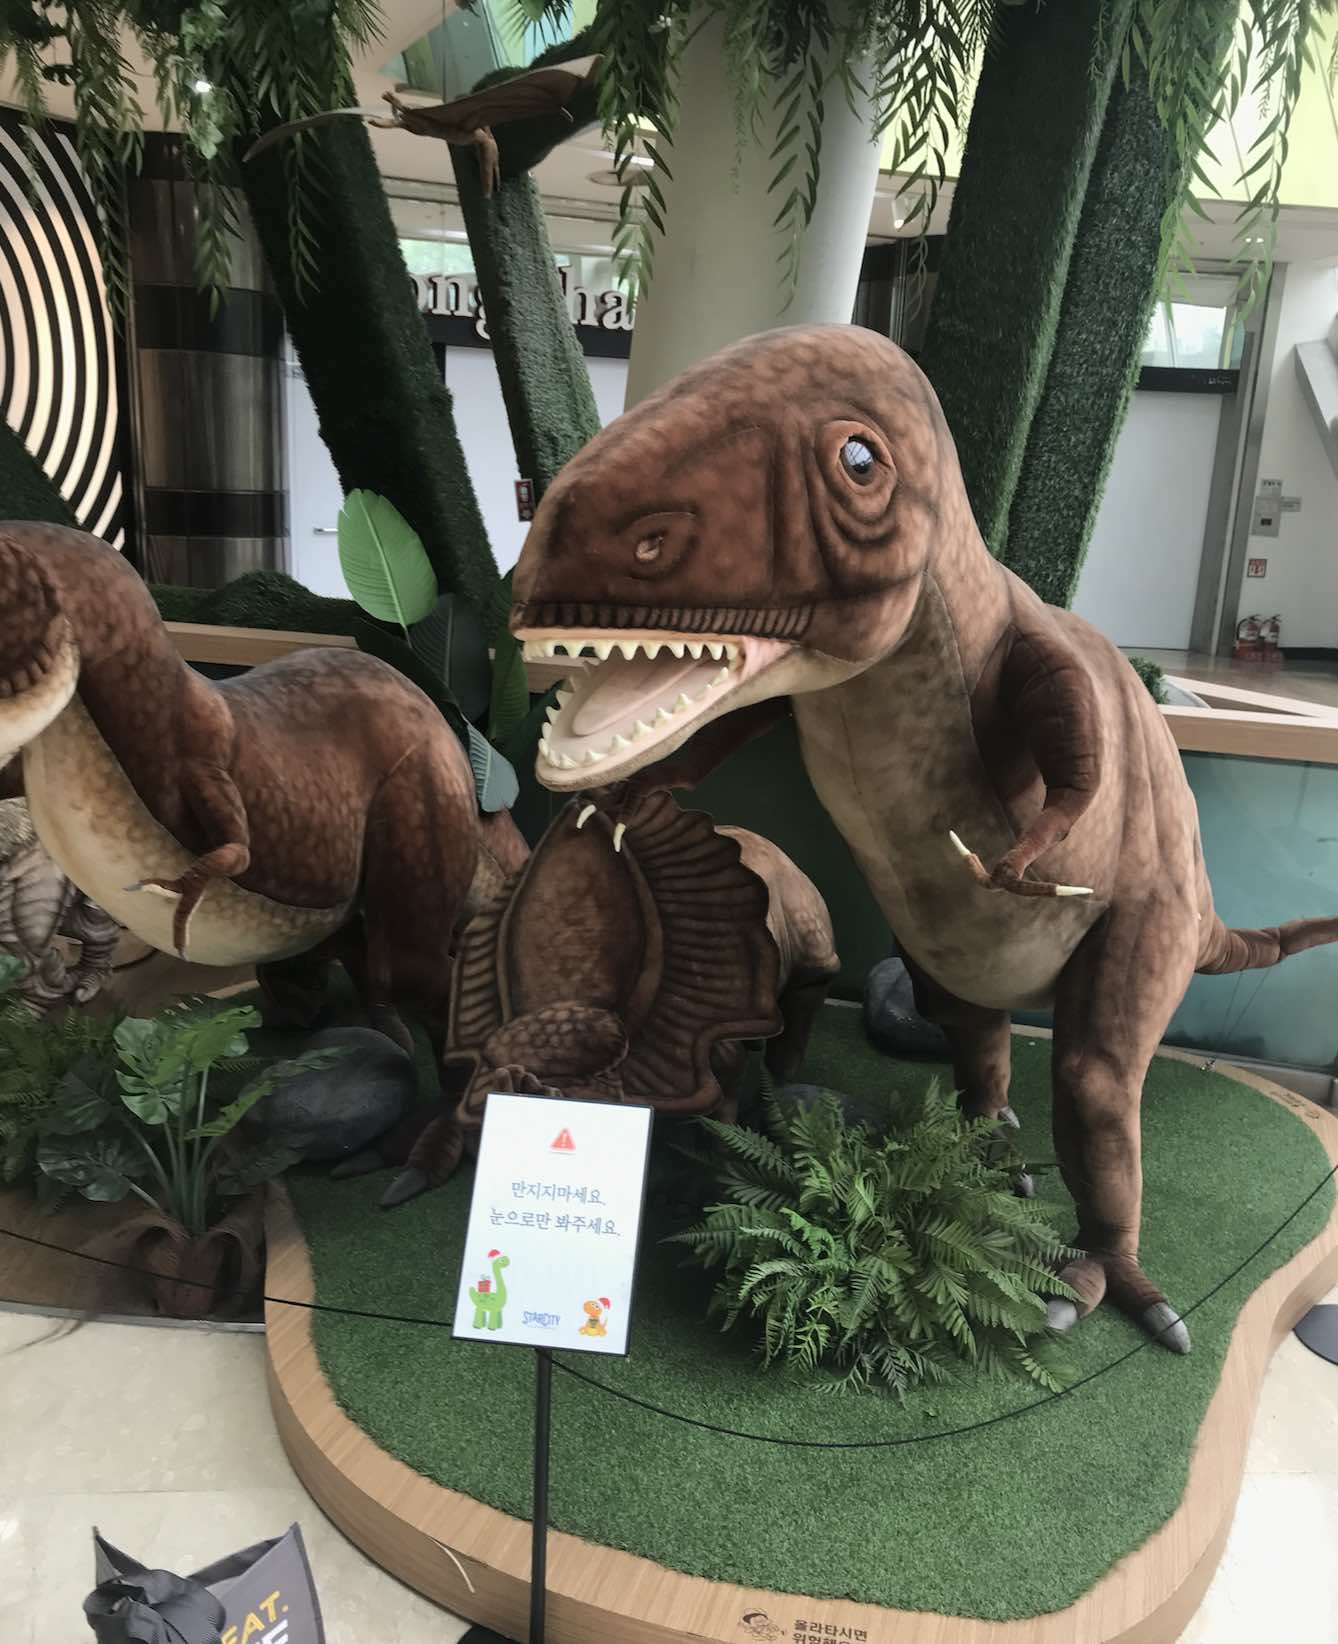 small scale dinosaur display in a shopping mall